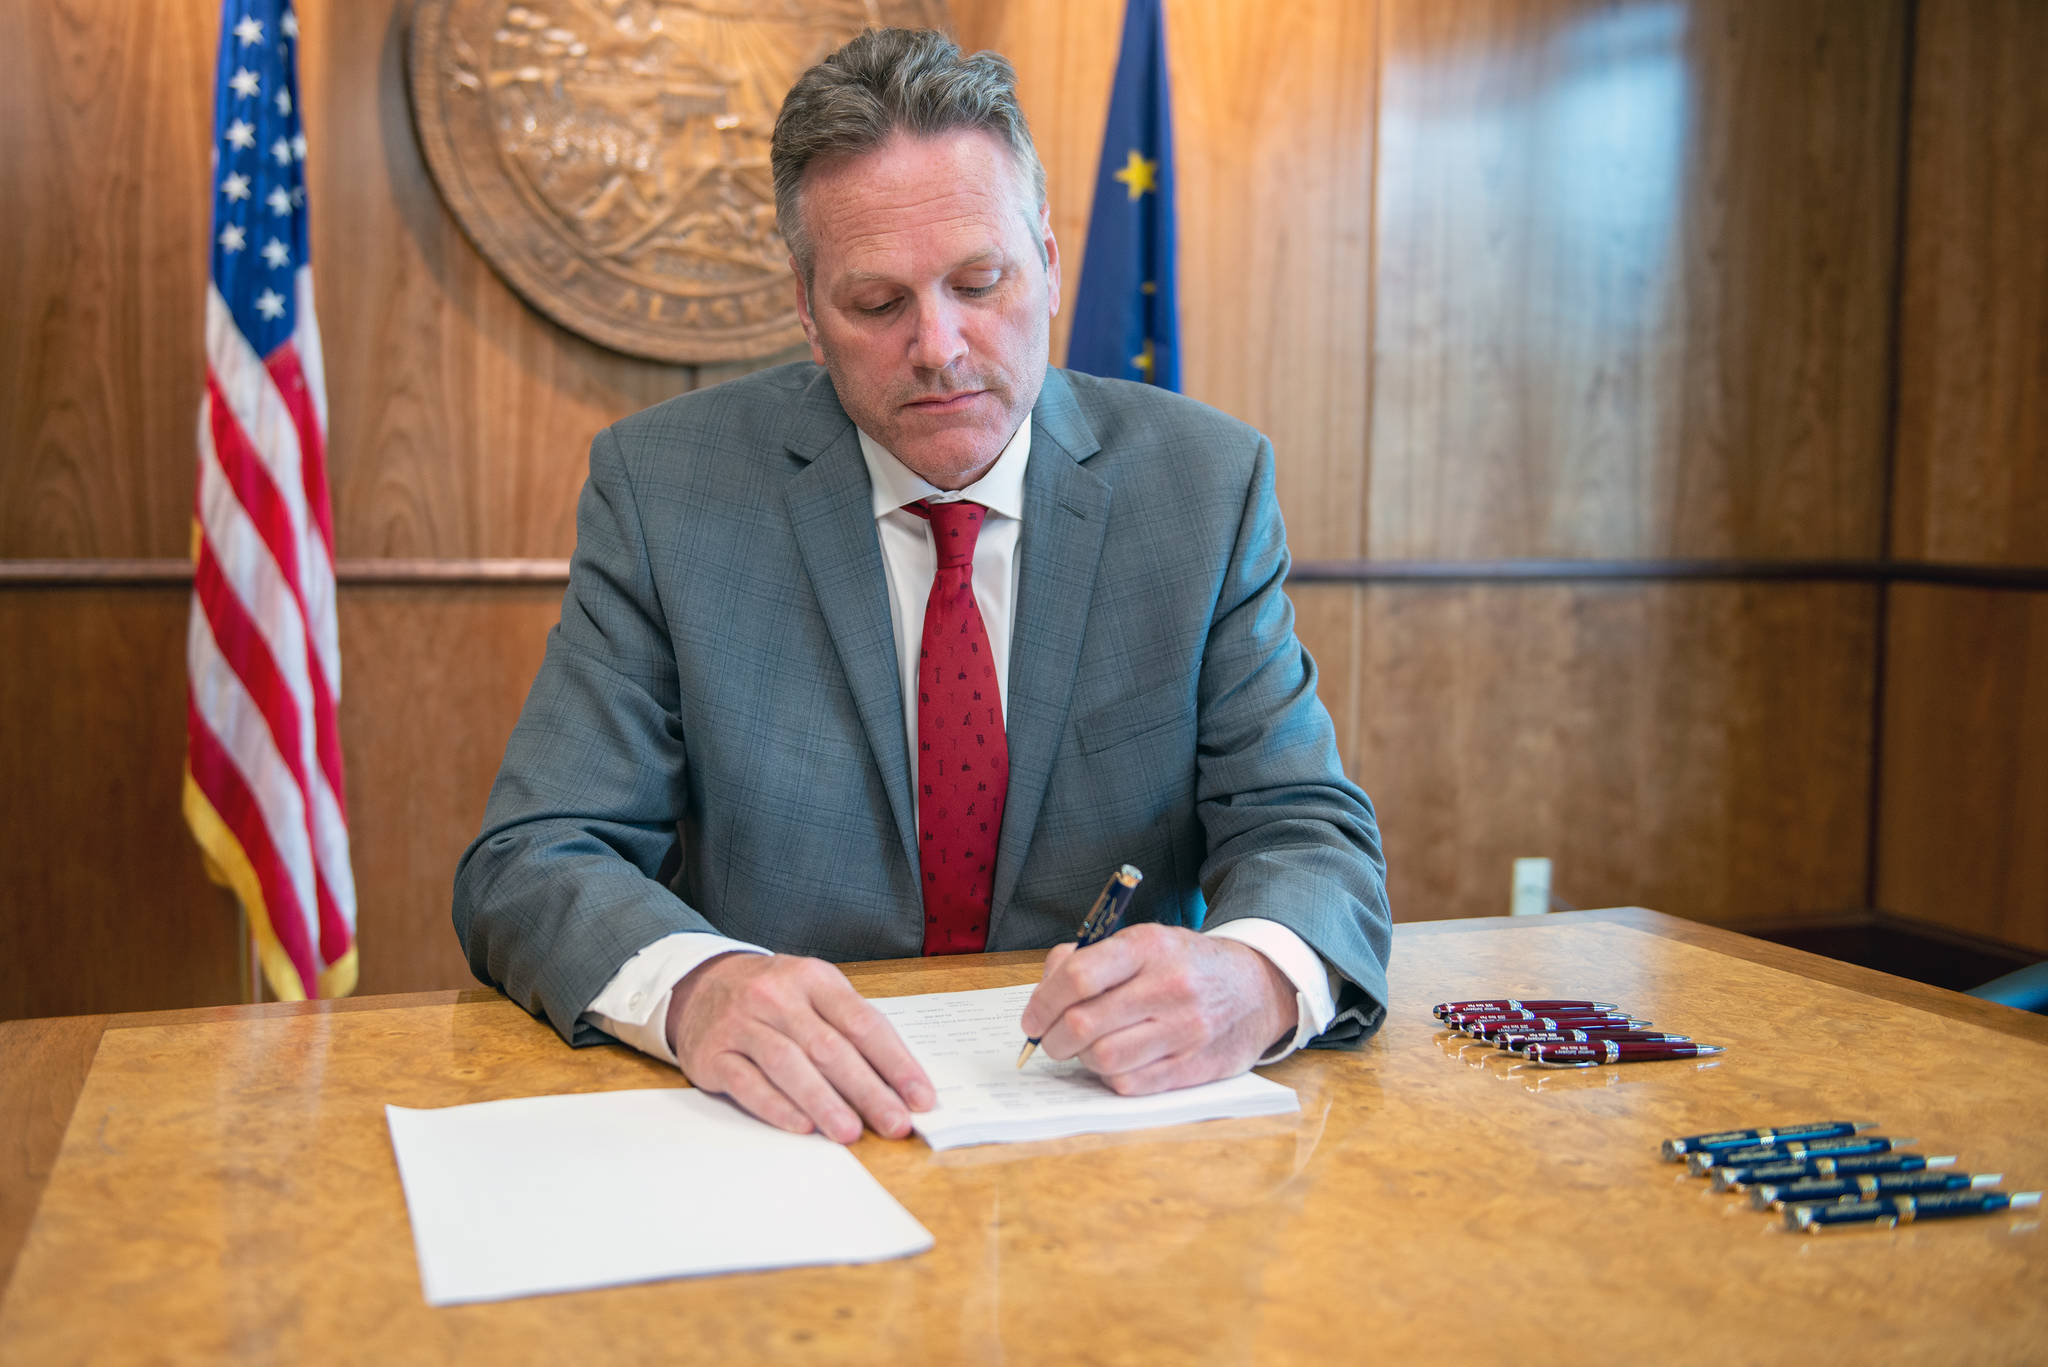 Gov. Mike Dunleavy signs House Bill 2001 at his office in Anchorage on Monday, August 19, 2019. (Courtesy photo)